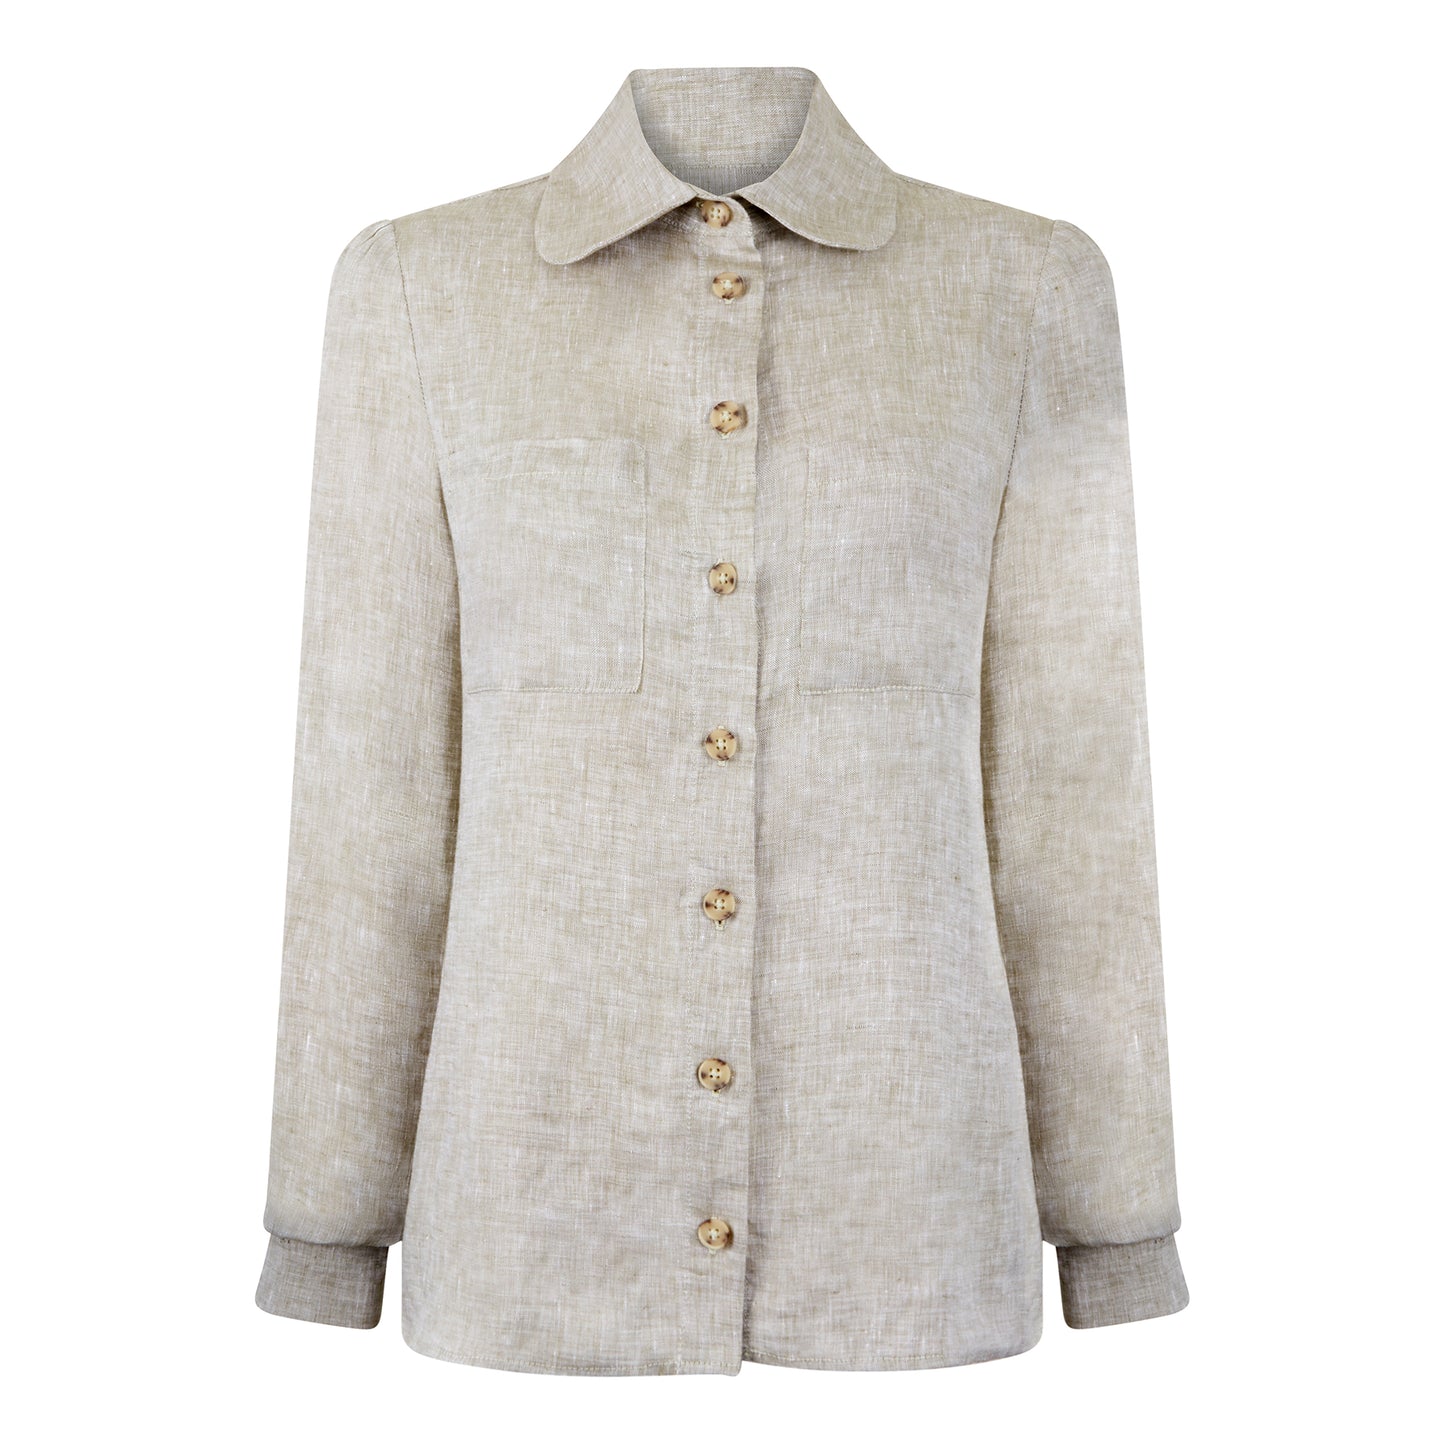 Ladies Luxury Linen Shirt, Linen Blouse, Made in Britain, British Country Clothing